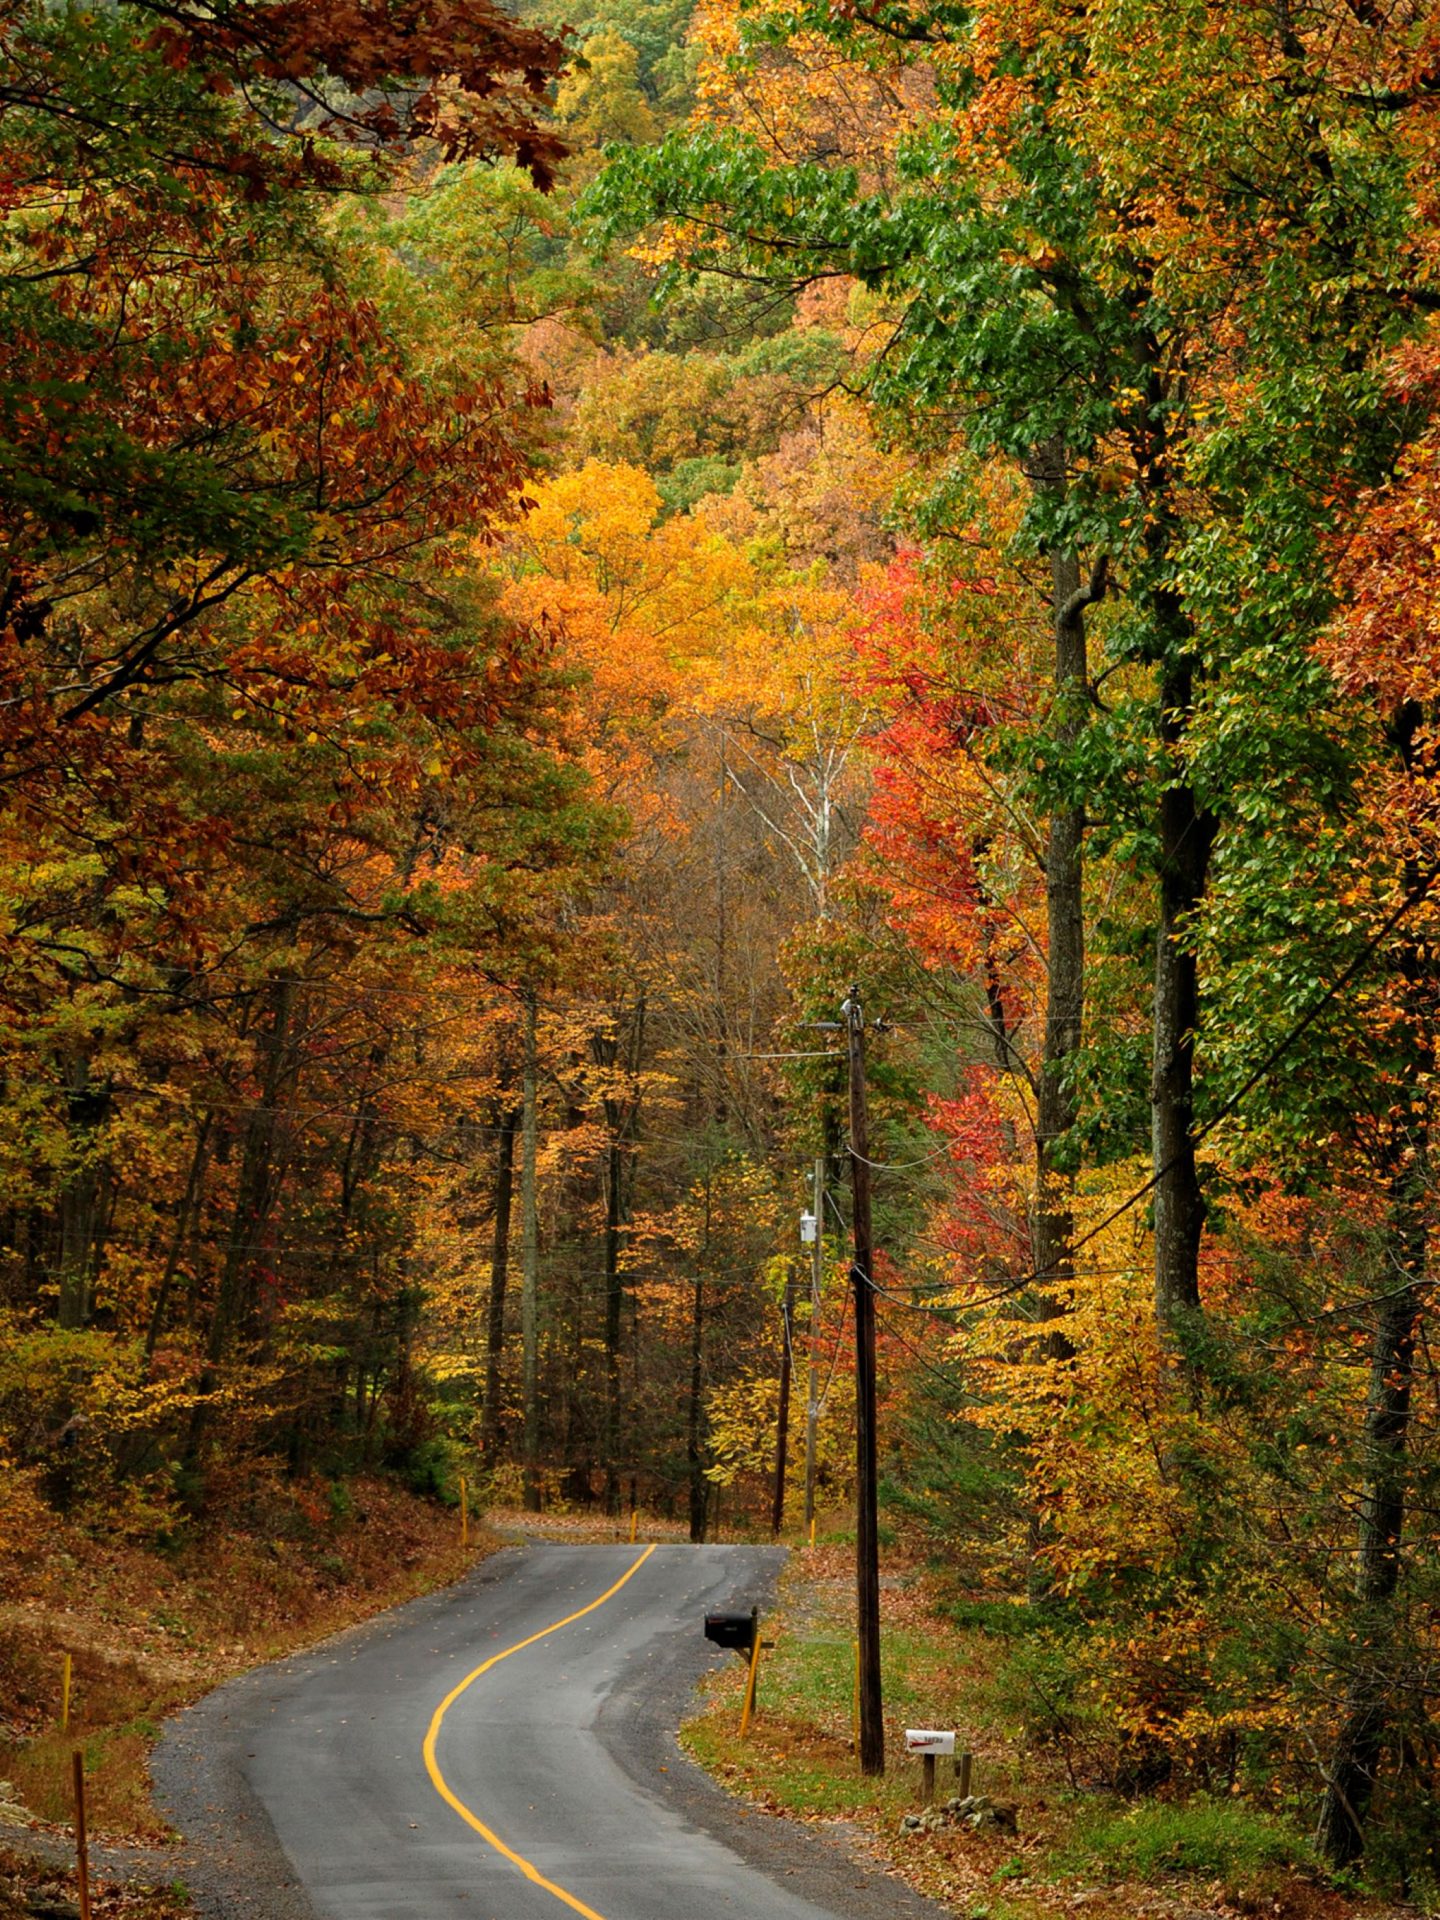 Leaves are showing vibrant colors Tuesday, October 21, 2014 along Gilbert Road, Fort McCord, Pa., near Buchanan State Forest.